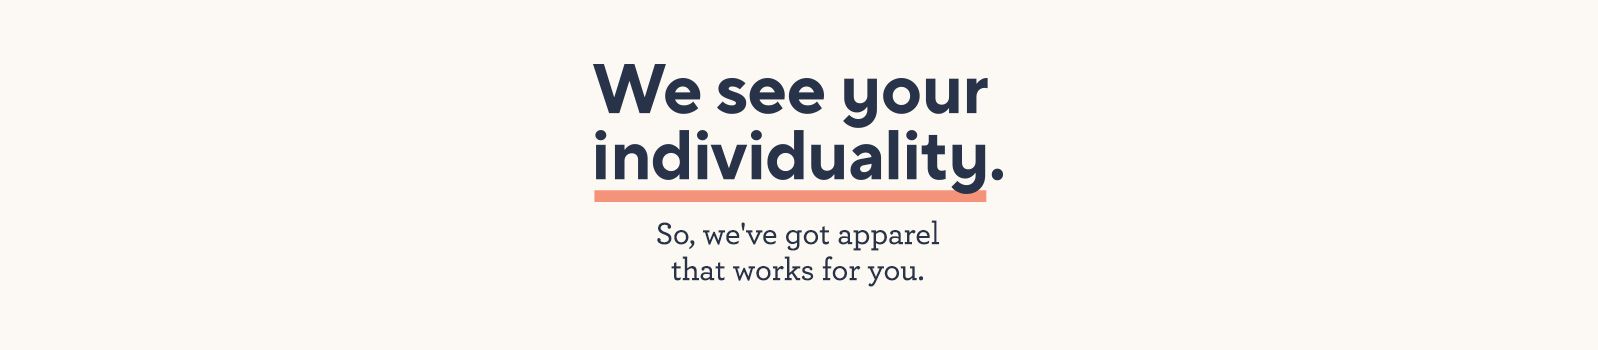 We See Your Individuality.  So, we've got apparel that works for you.